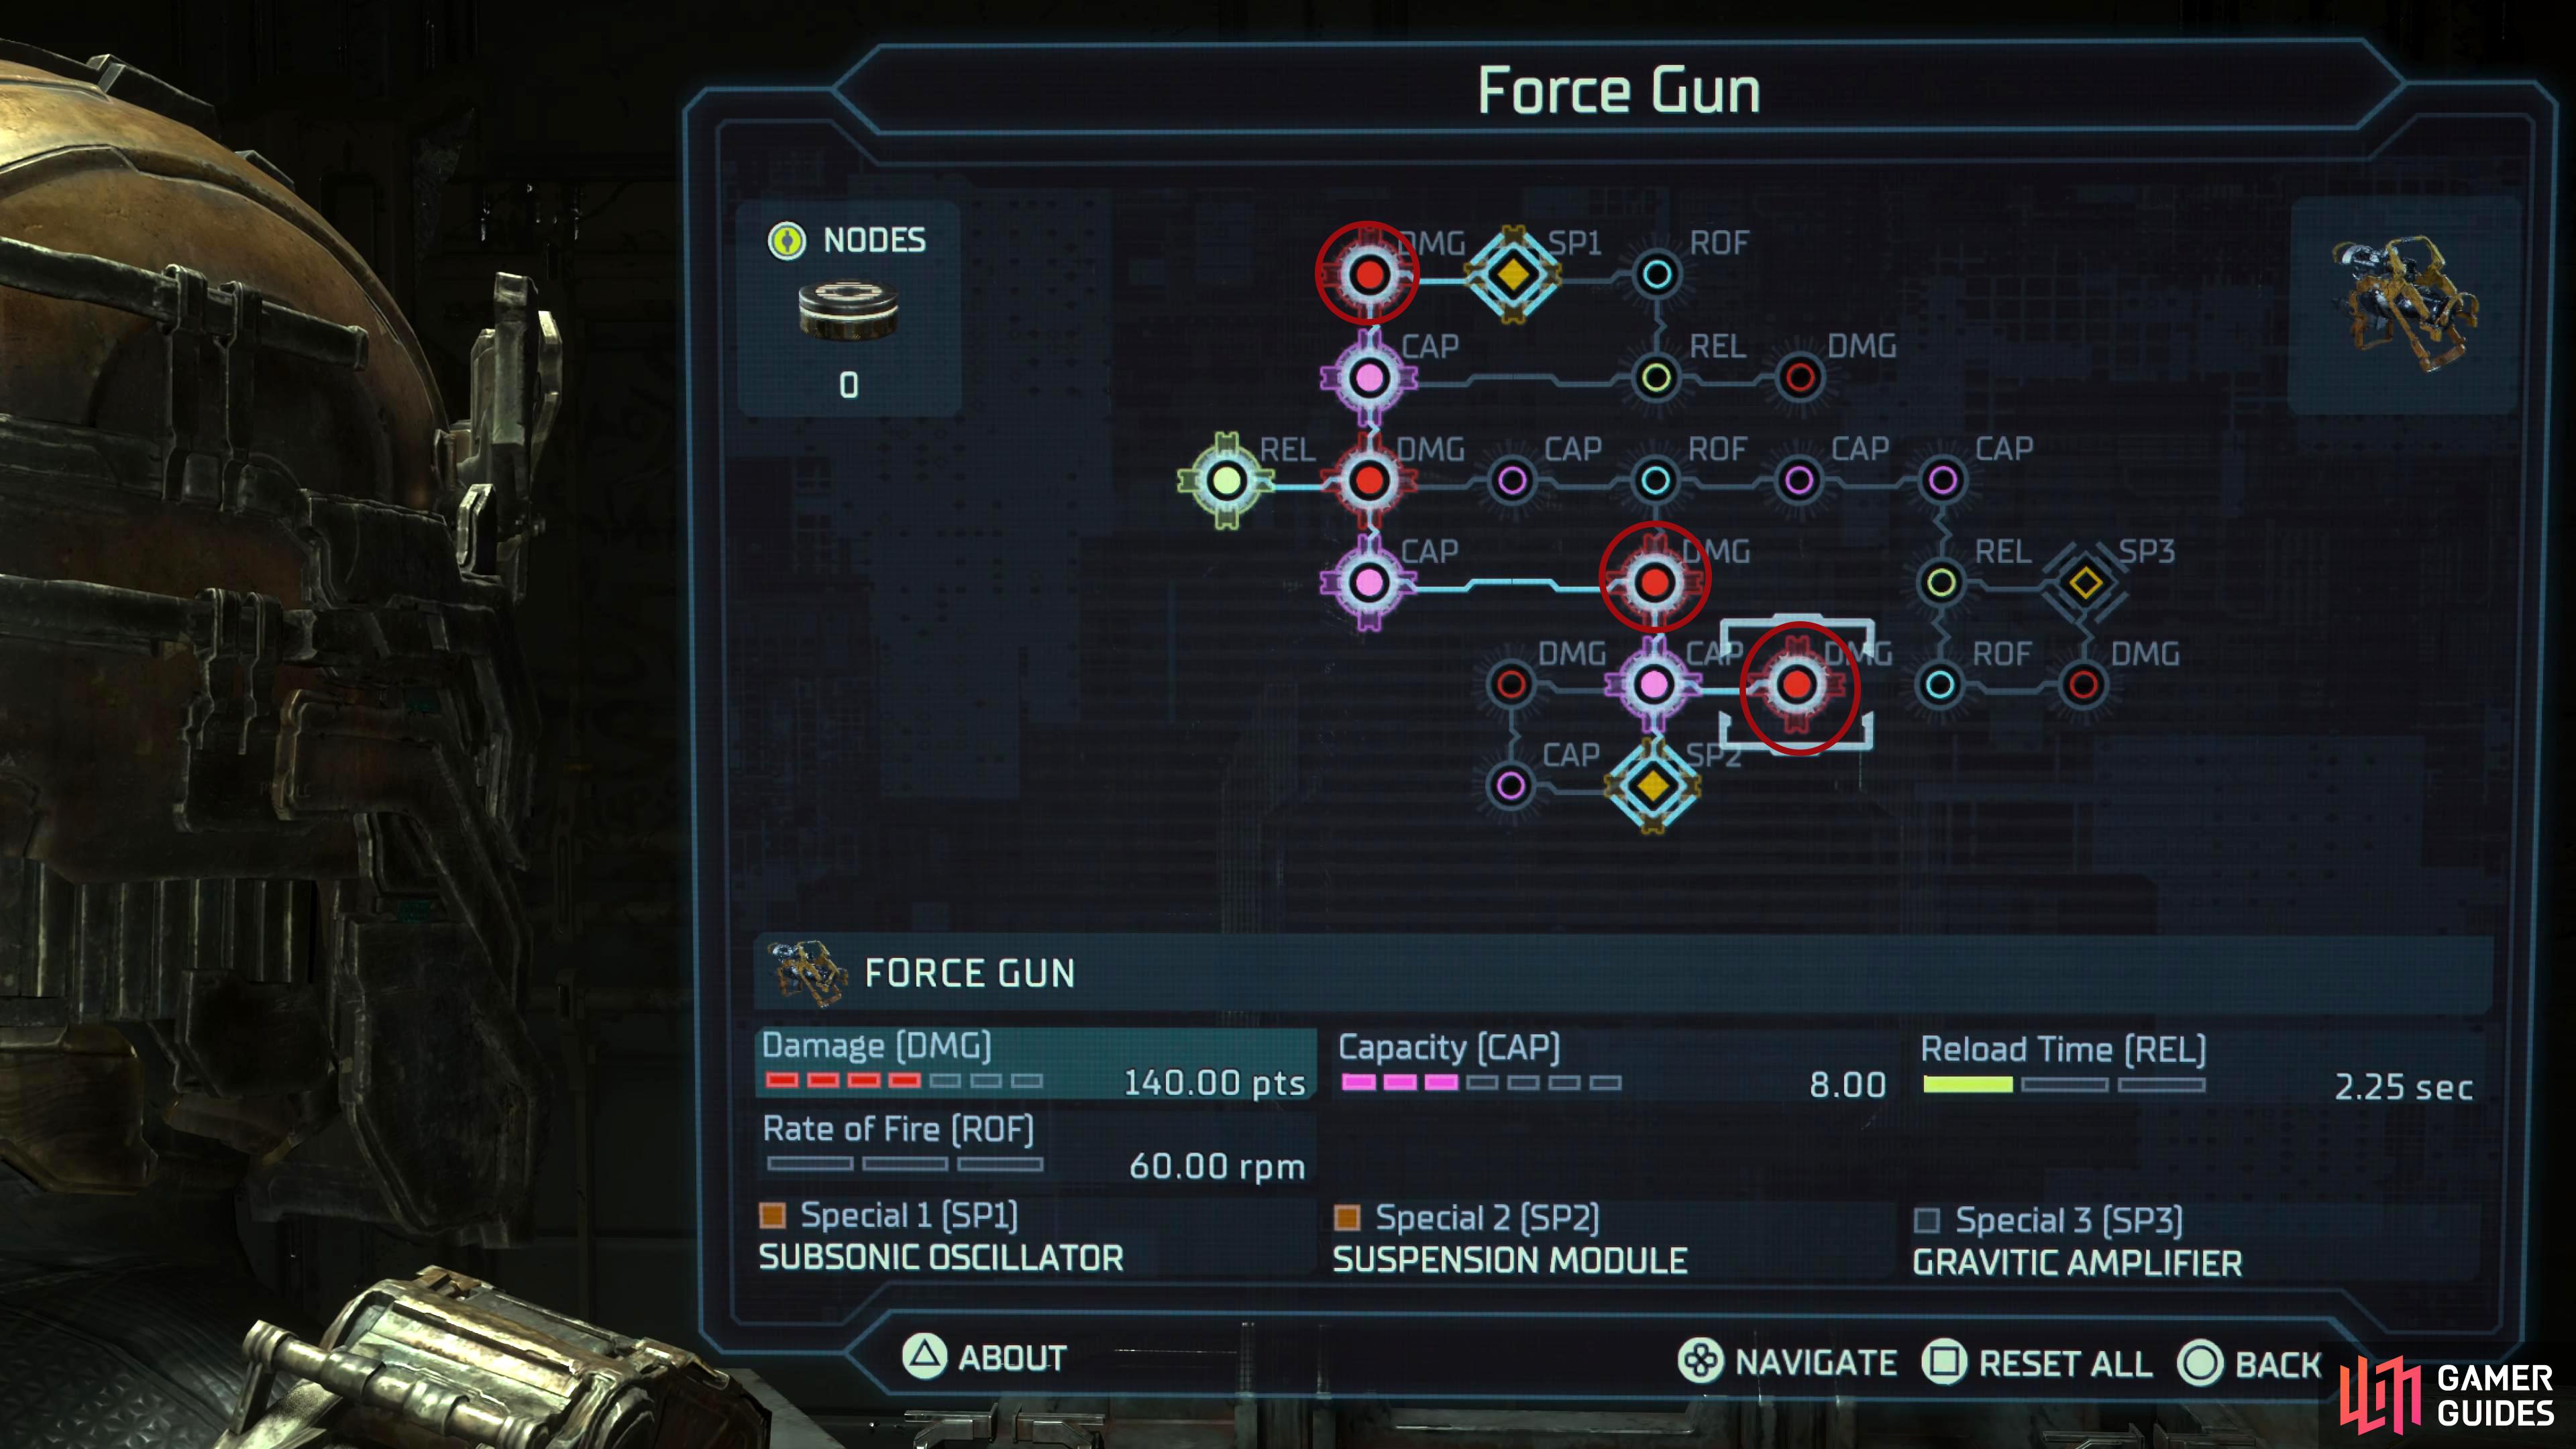 Prioritize Damage when upgrading the Force Gun.